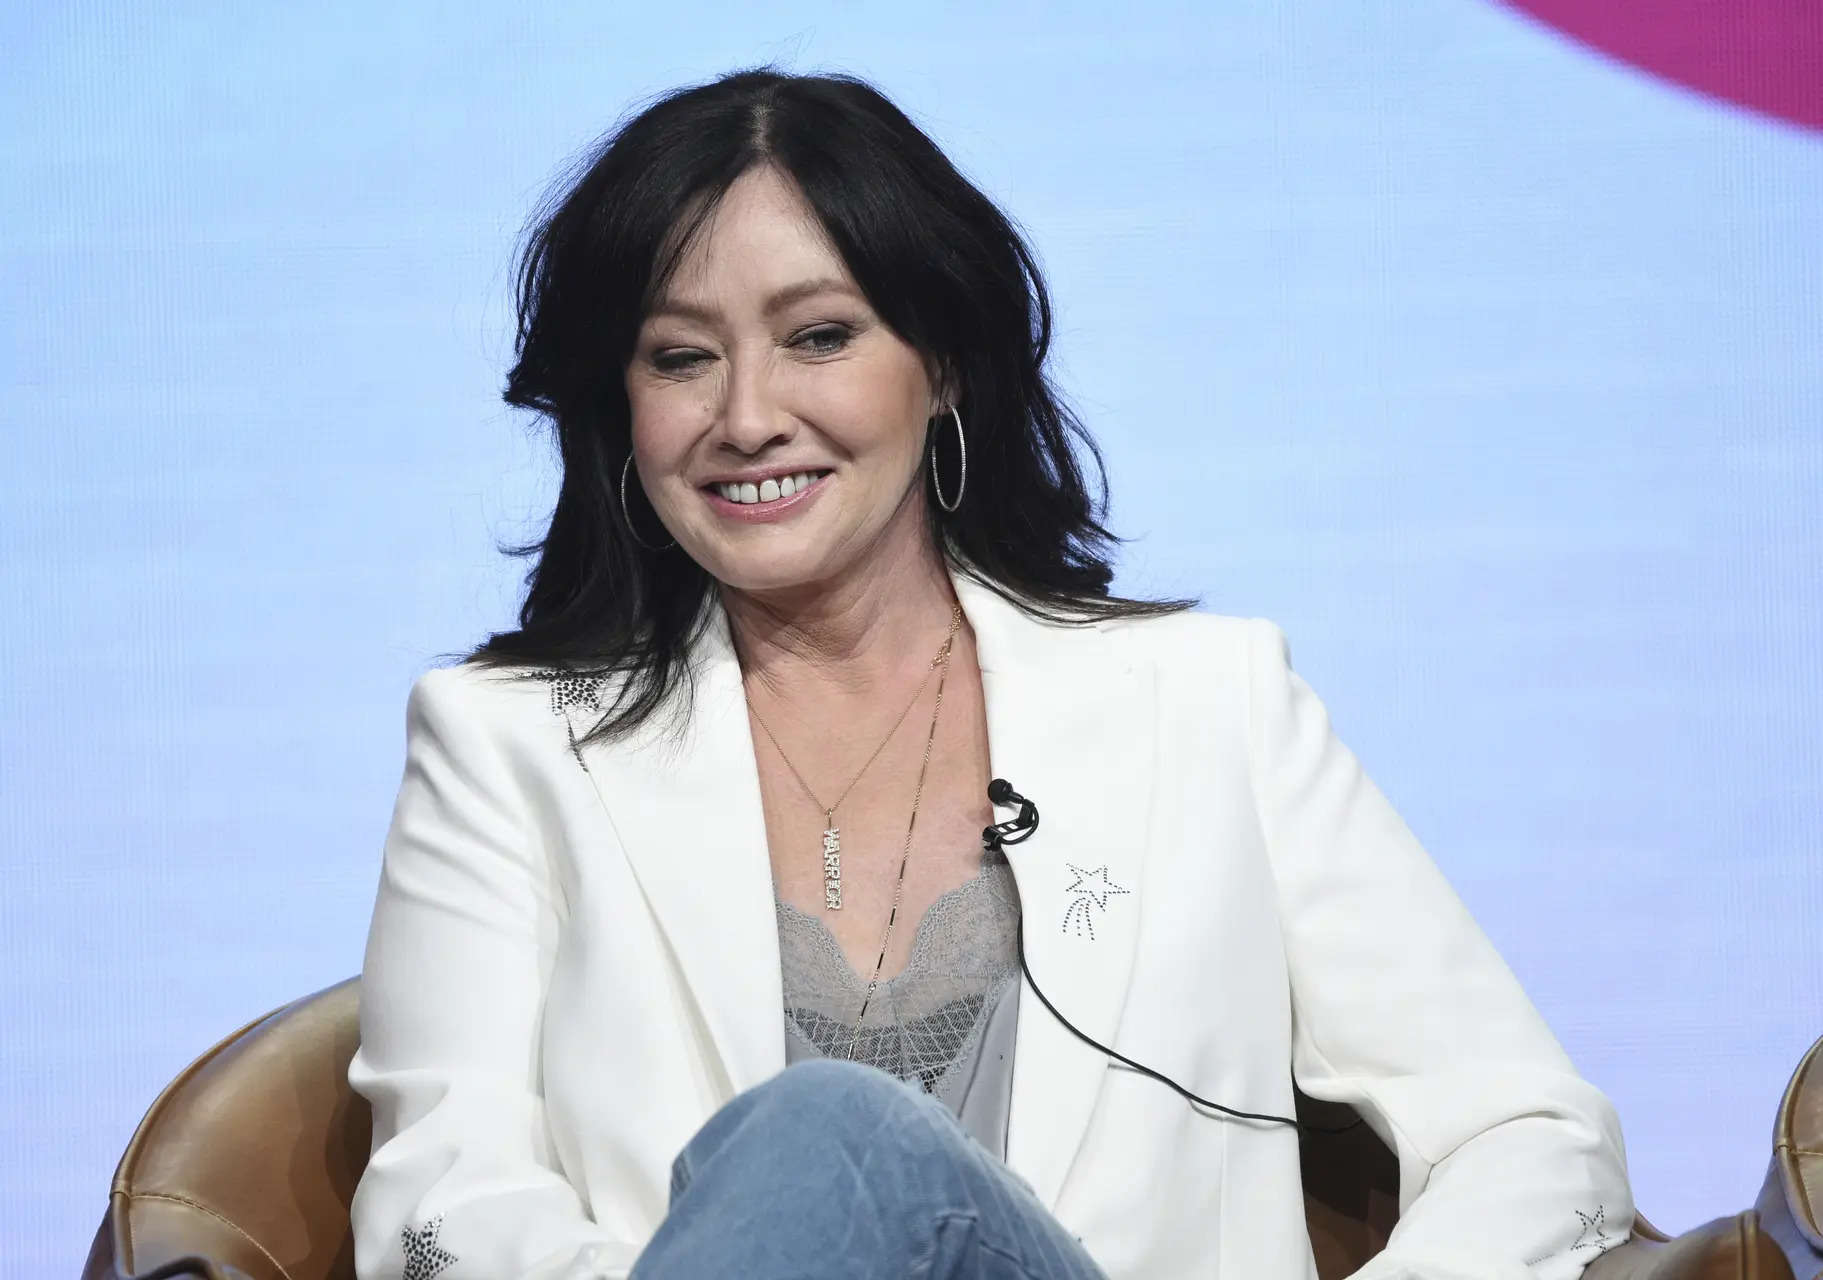 'Beverly Hills, 90210' star Shannen Doherty’s doctor shares her final moments. Everything you may like to know 